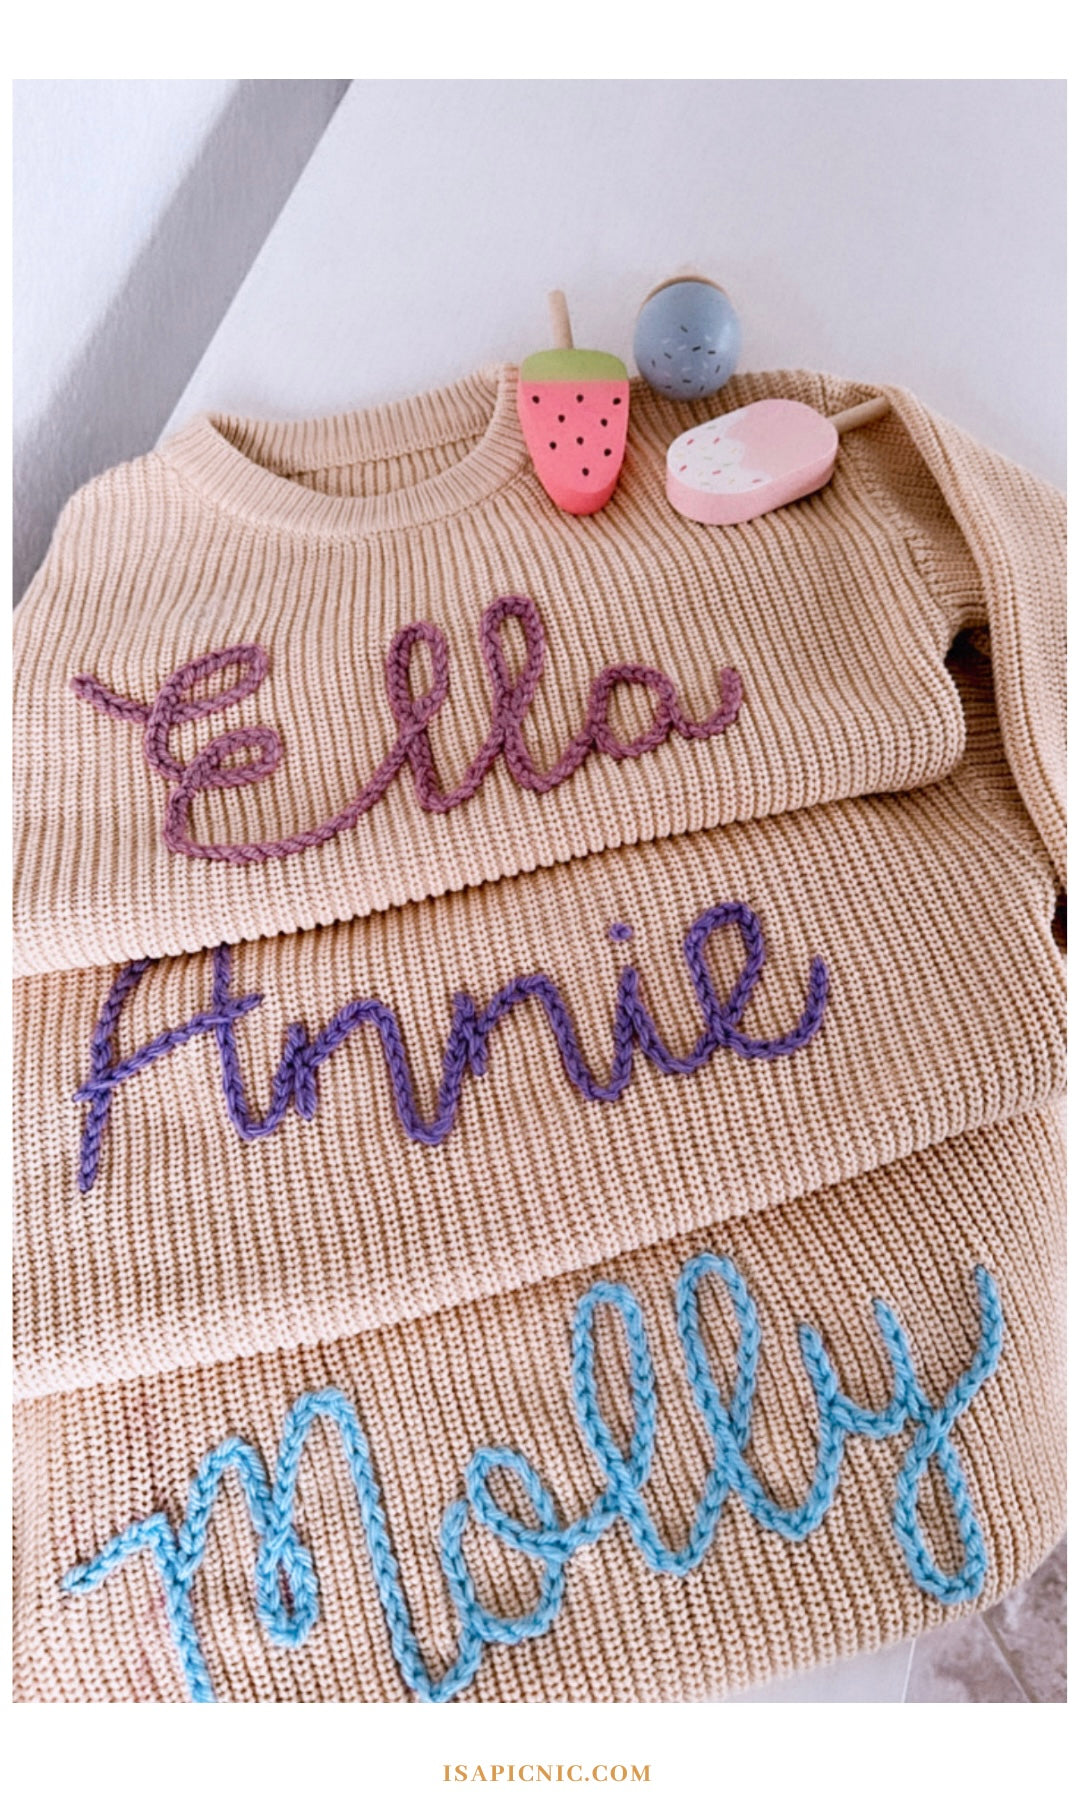 Name Sweater, knit toddler chunky sweater Isapicnicbox –